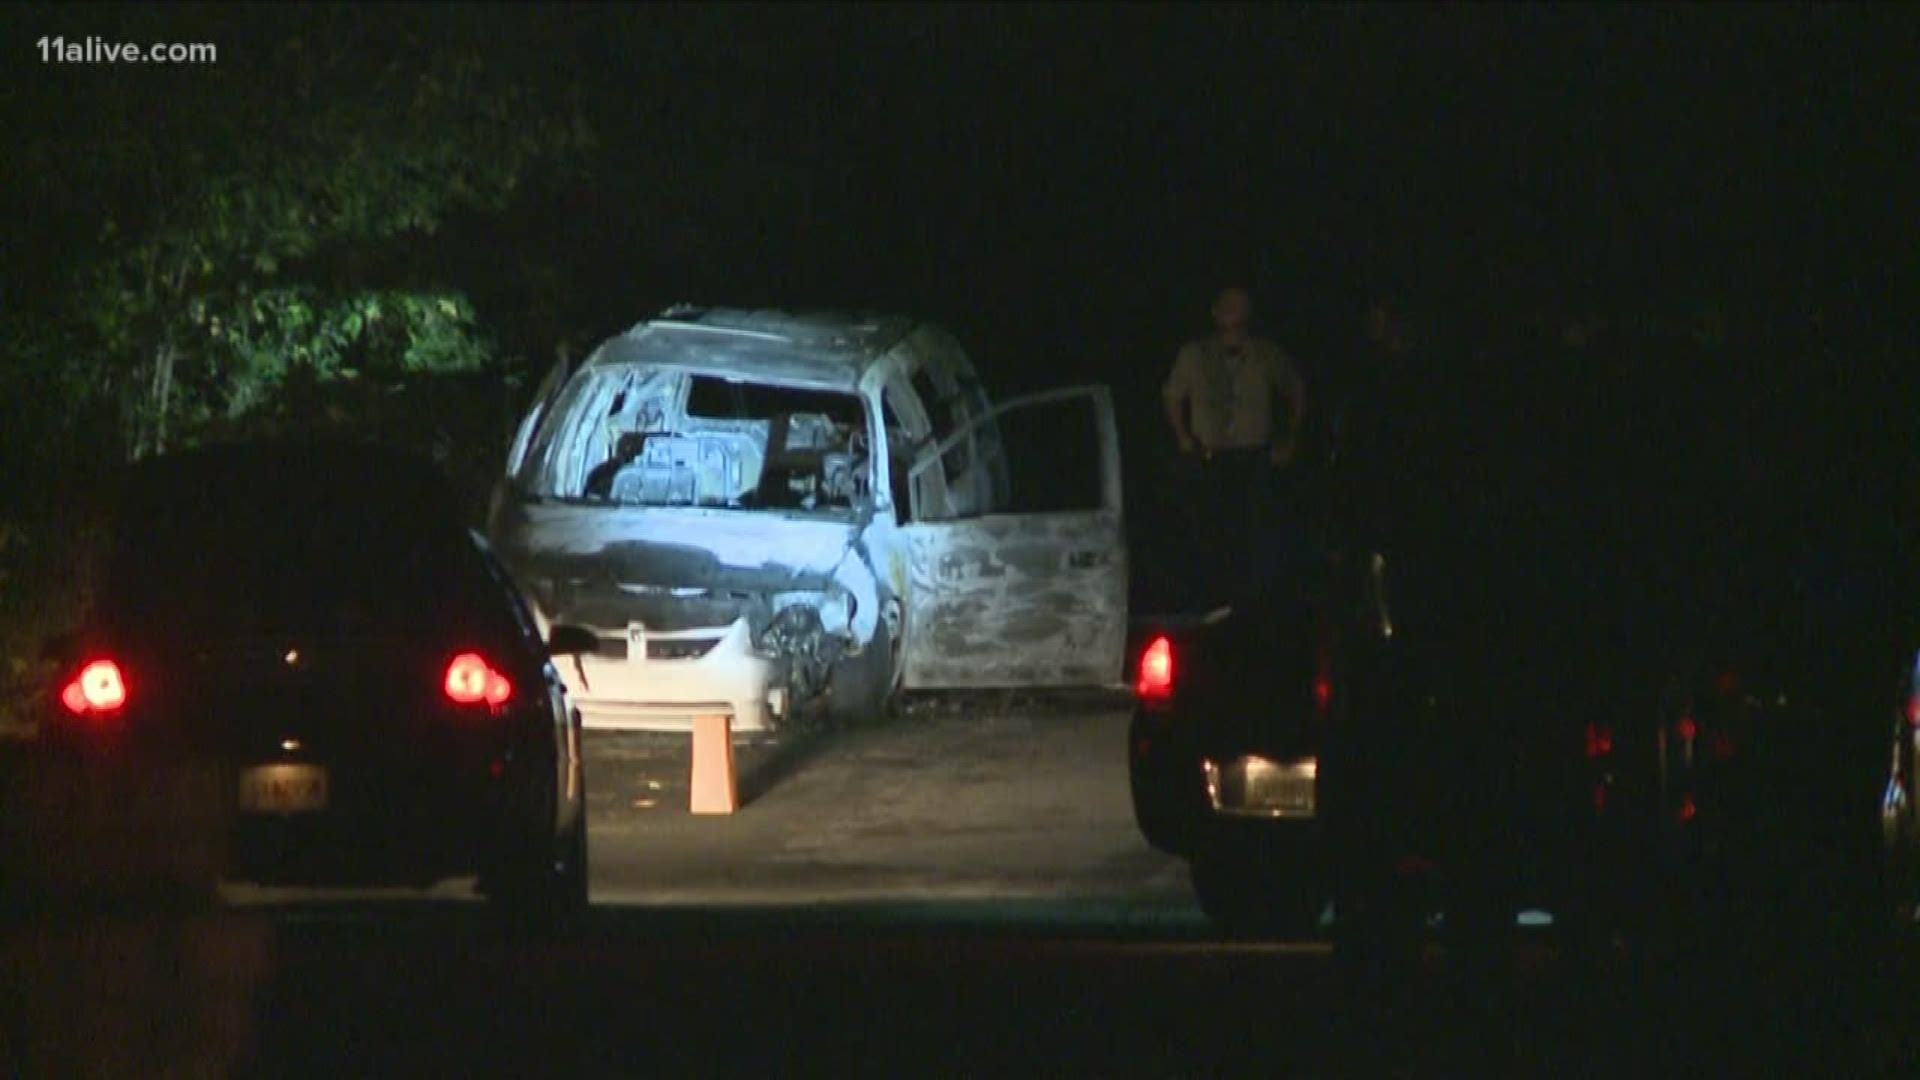 Authorities found what appeared to be a woman's body inside the vehicle.